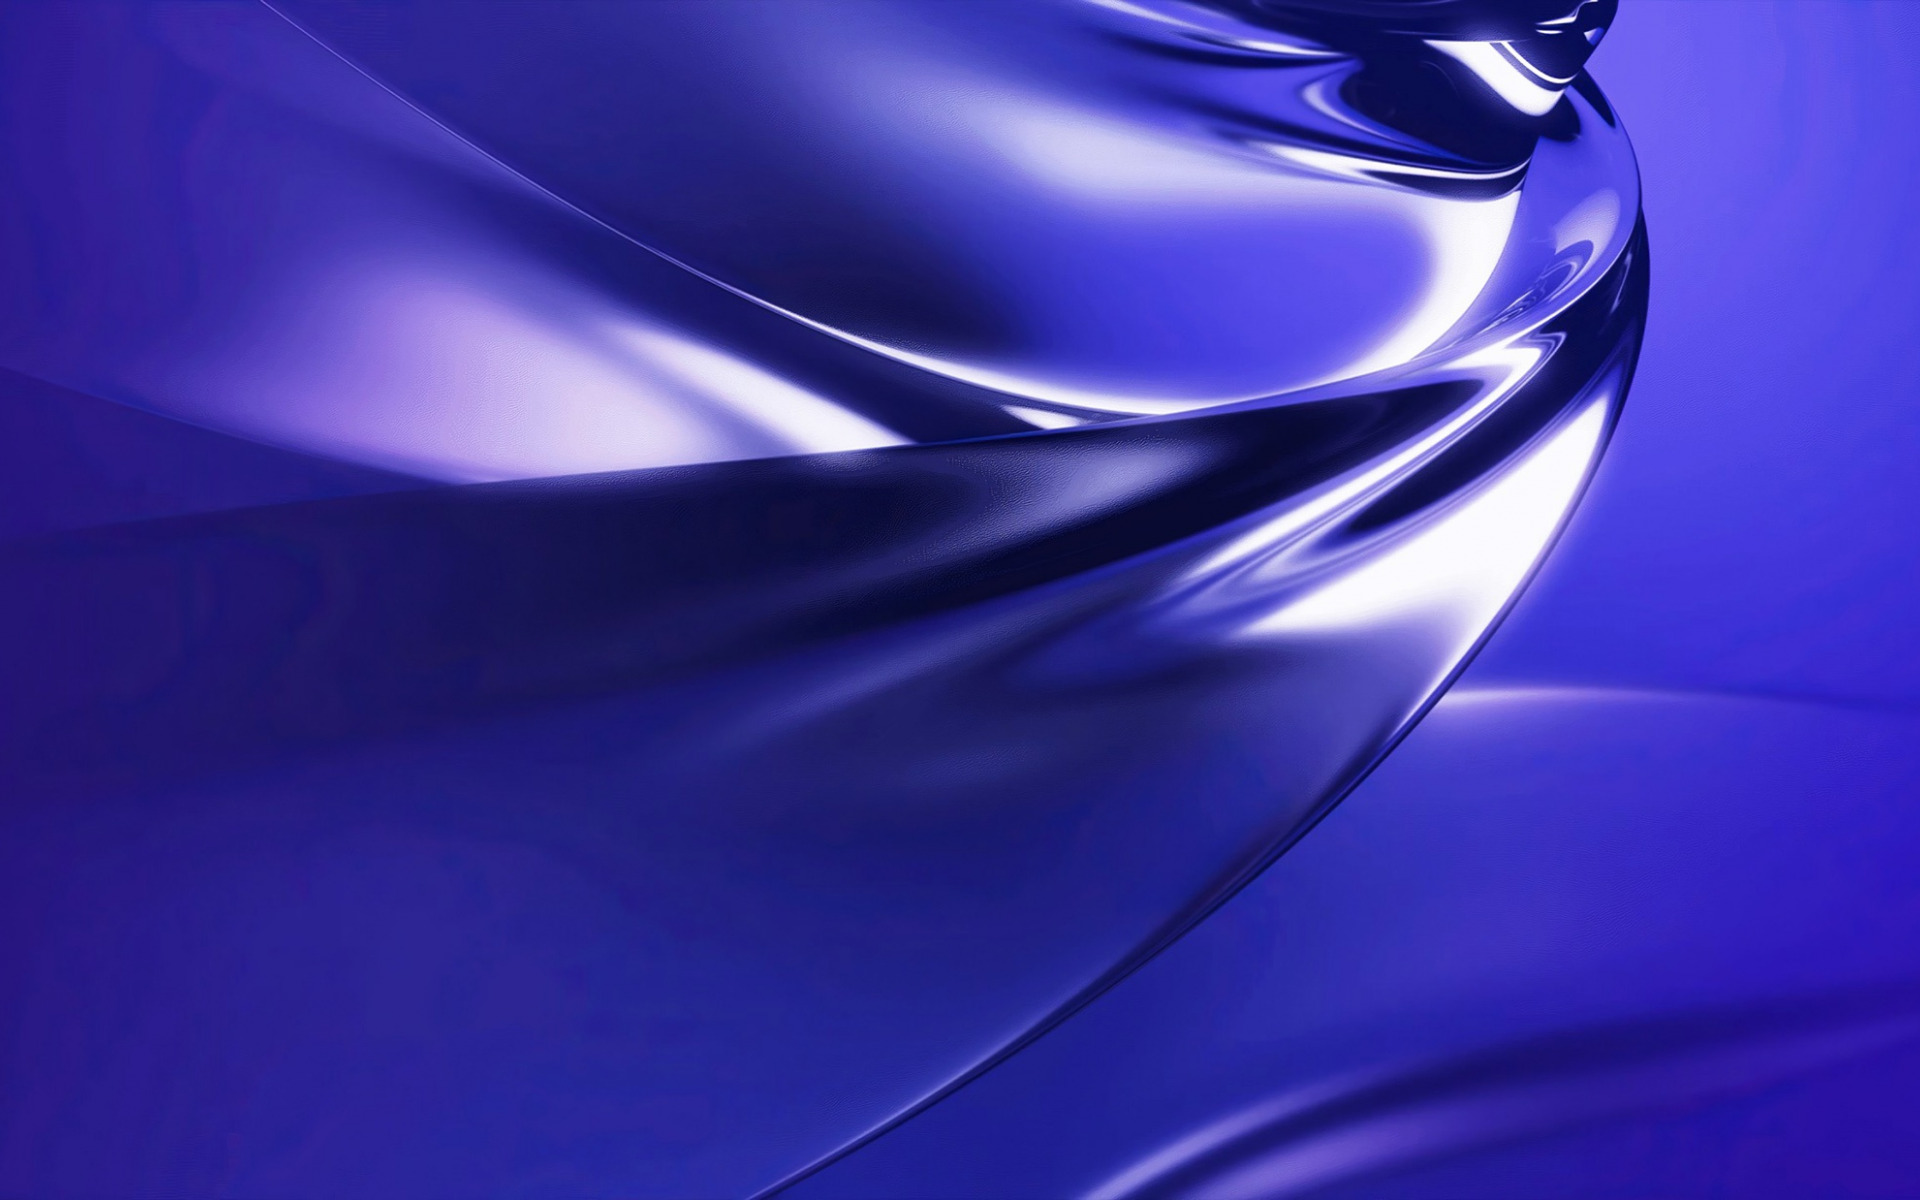 Download wallpaper blue creative background, blue glass won, blue waves background, glass background, blue background for desktop with resolution 1920x1200. High Quality HD picture wallpaper